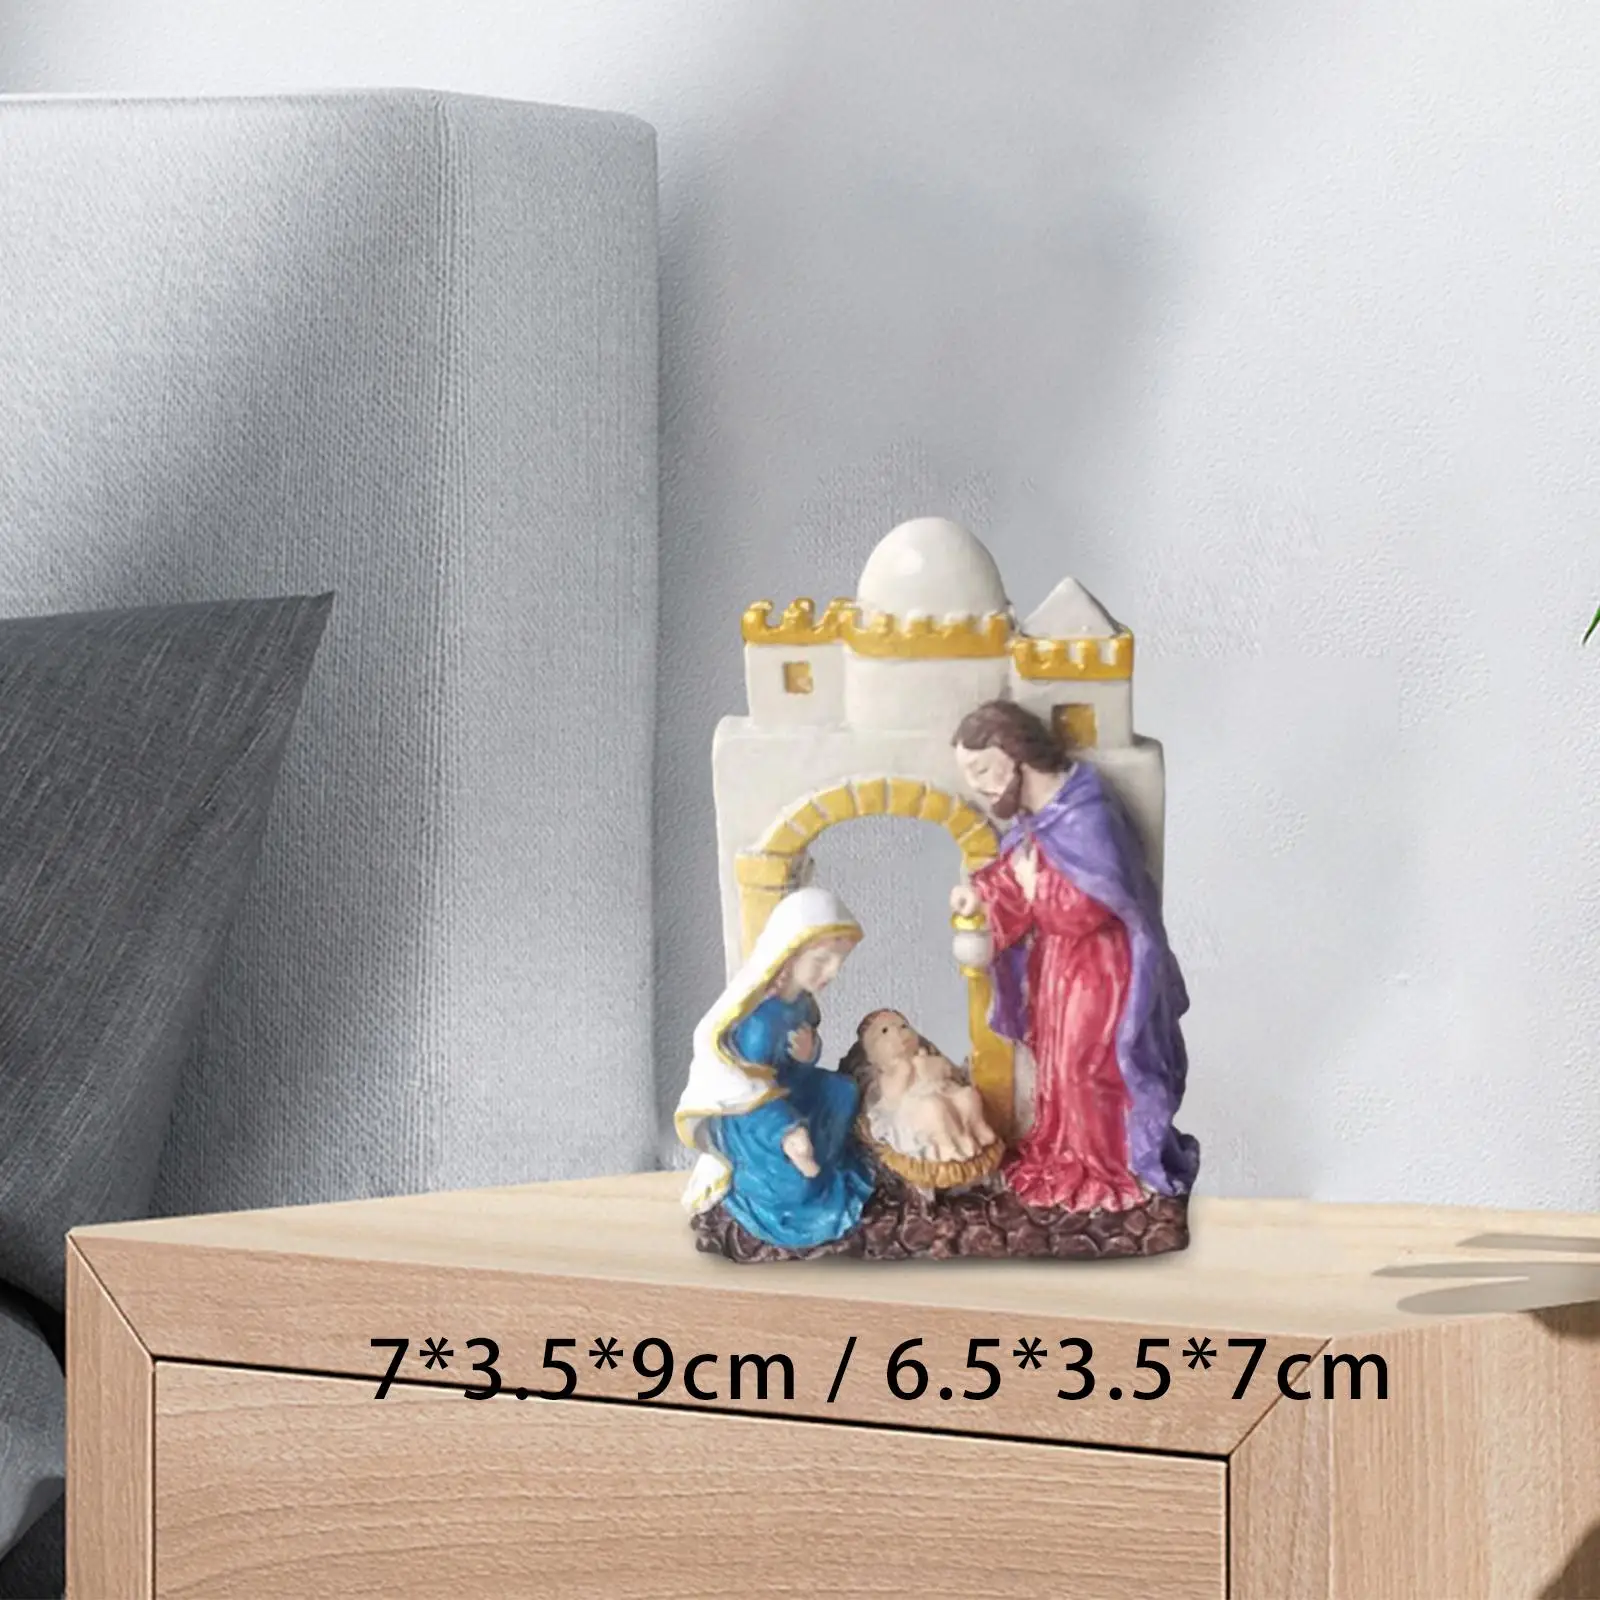 

Holy Family Figurine Joseph Jesus Mary Mother Nativity Scene Religious Statues for Holiday Home Decor Tabletop Photo Props Gifts